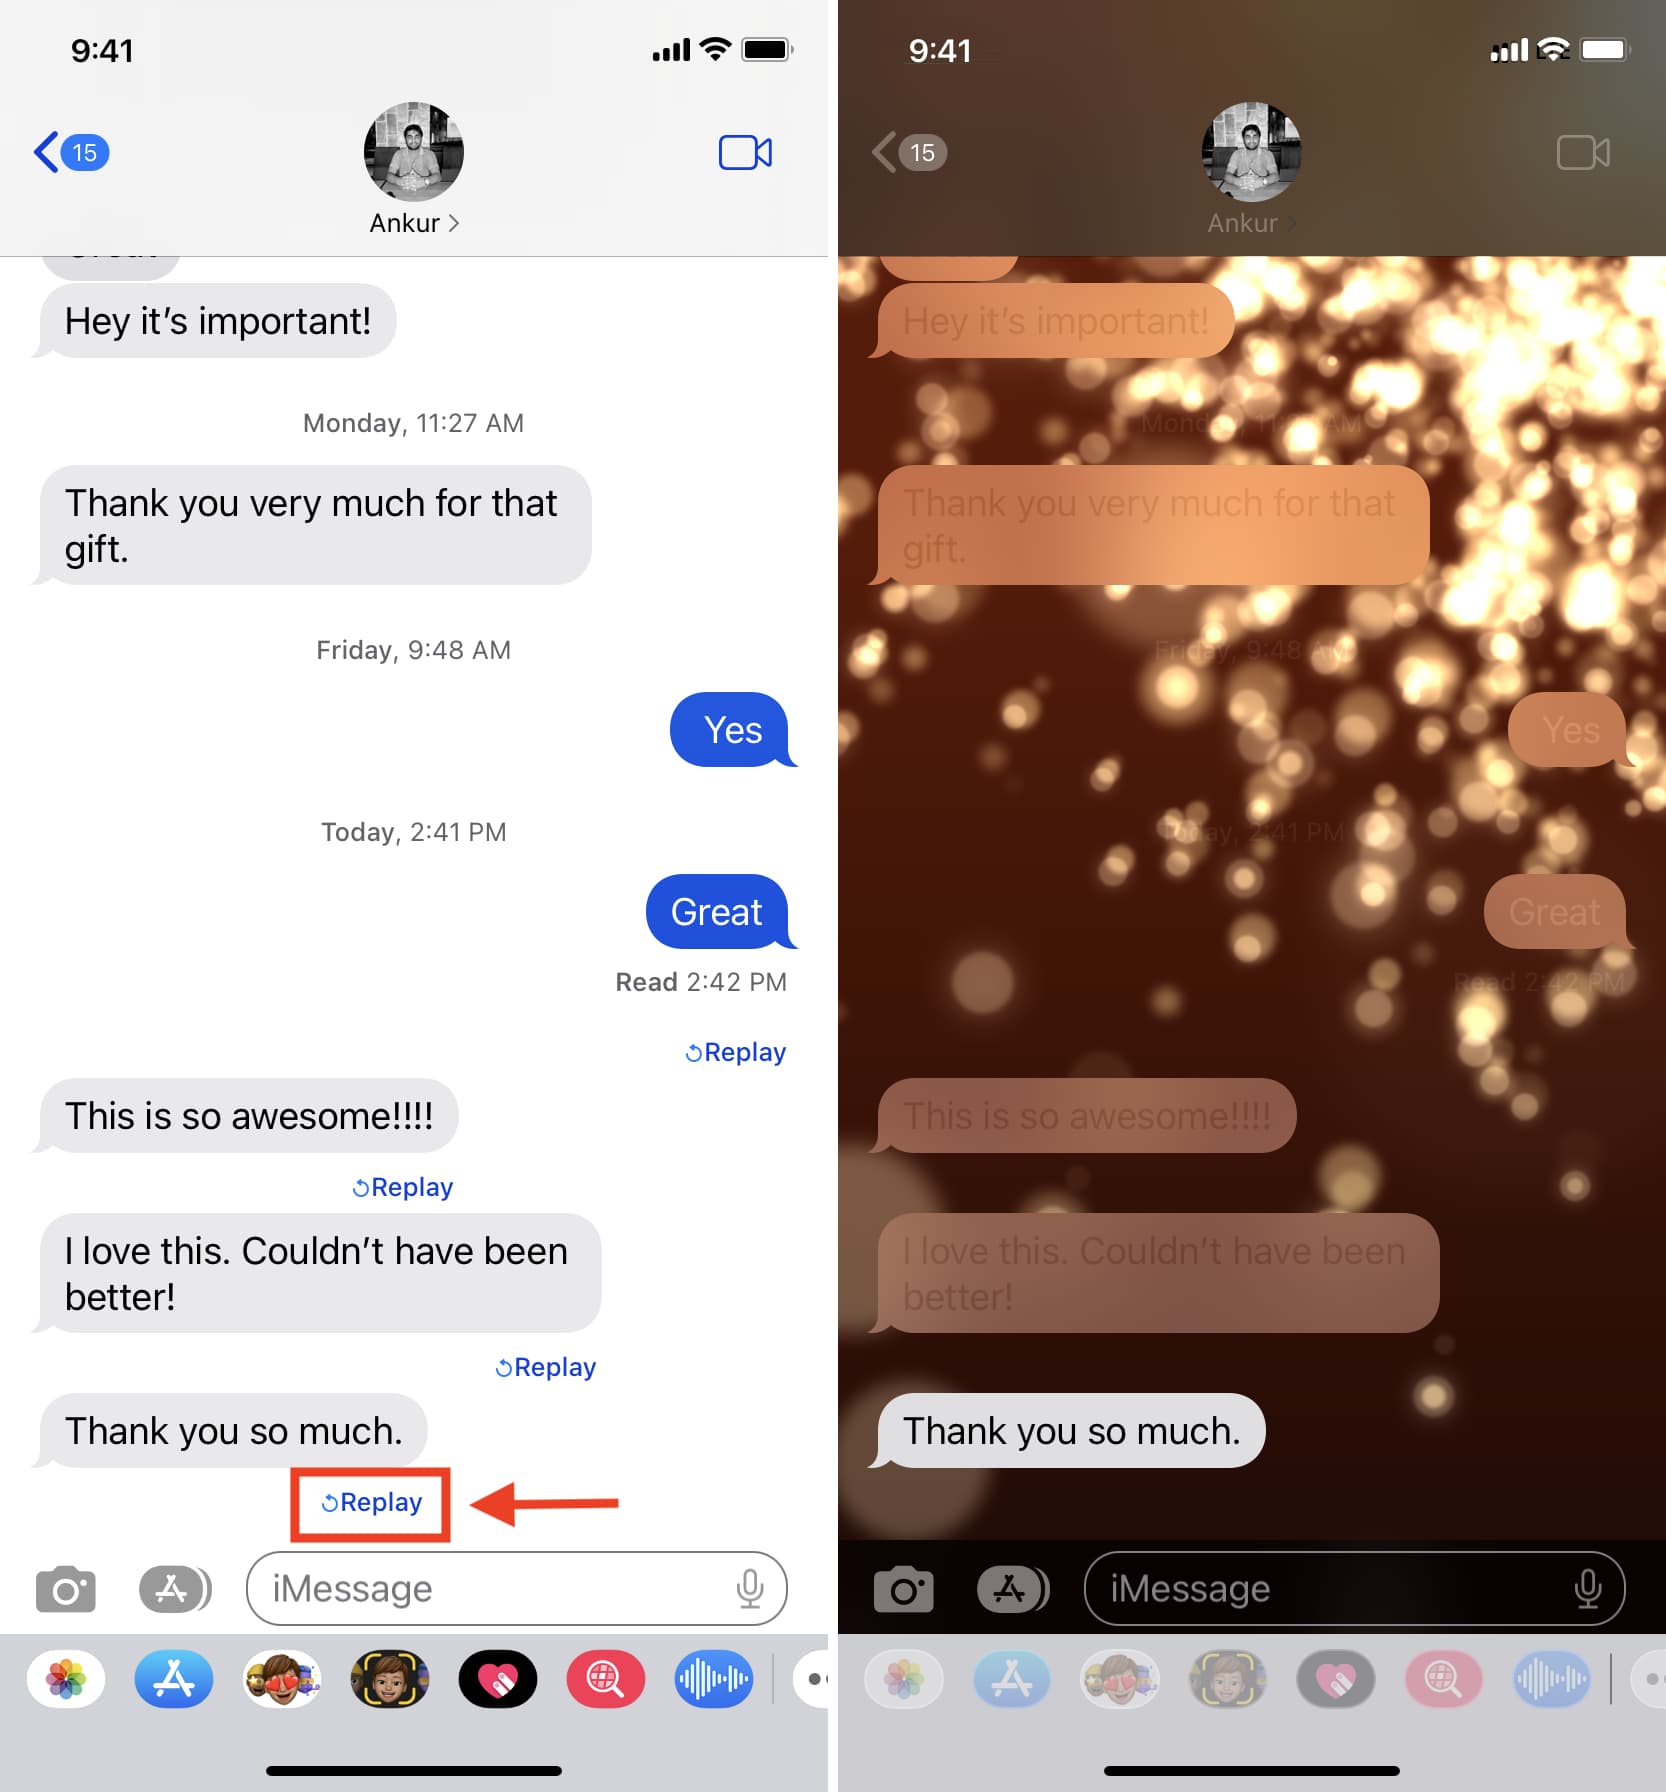 Replay bubble or screen effect in Messages app